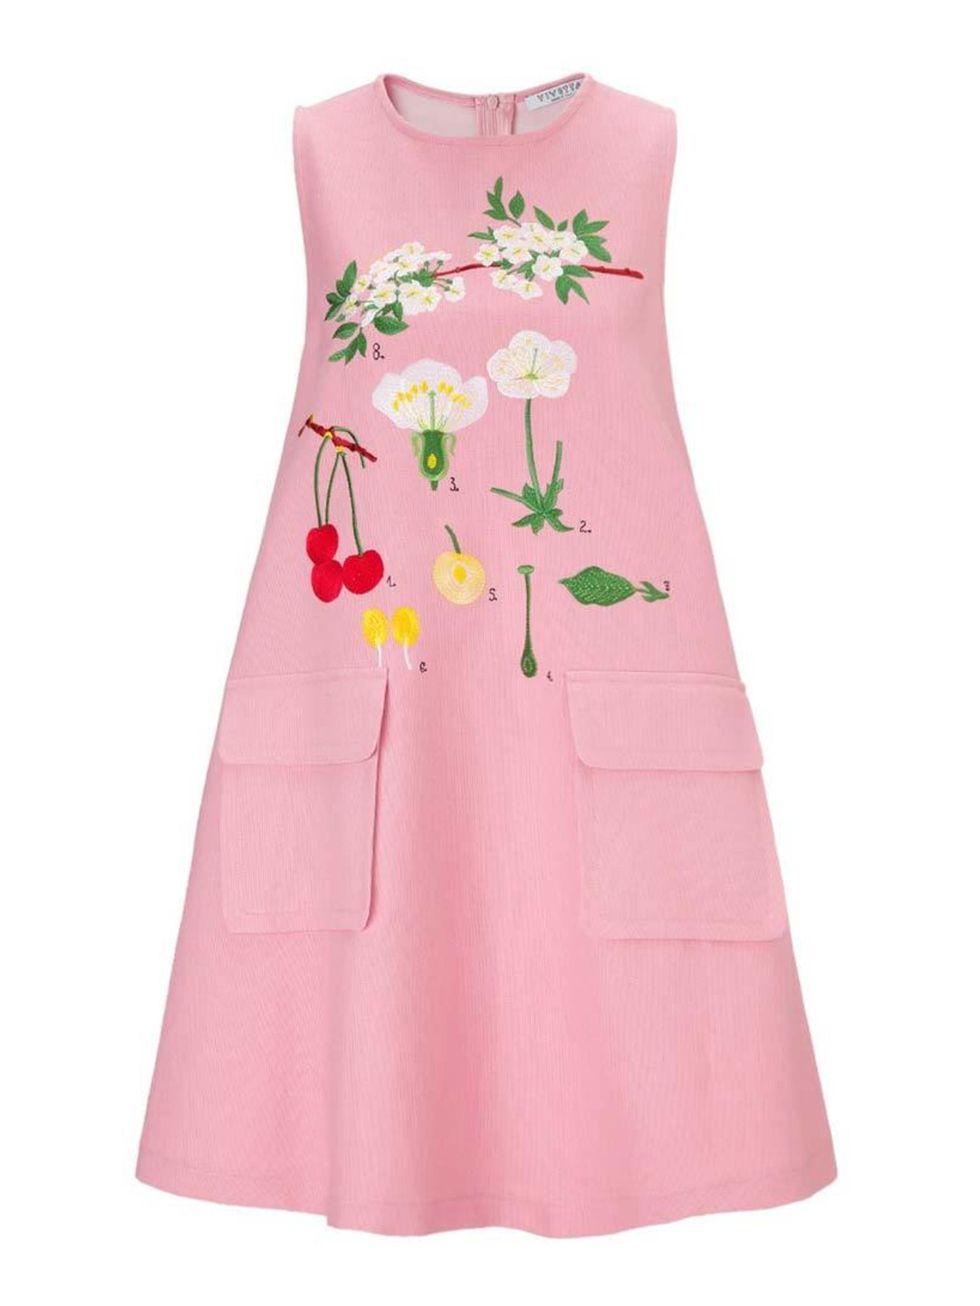 <p>Unapologetically girly. Pair with a killer pair of black ankle boots for a grown-up edge.</p>

<p>Vivetta dress, £310 at <a href="http://www.avenue32.com/pink-embroidered-charlie-dress-34701/" target="_blank">Avenue32</a></p>